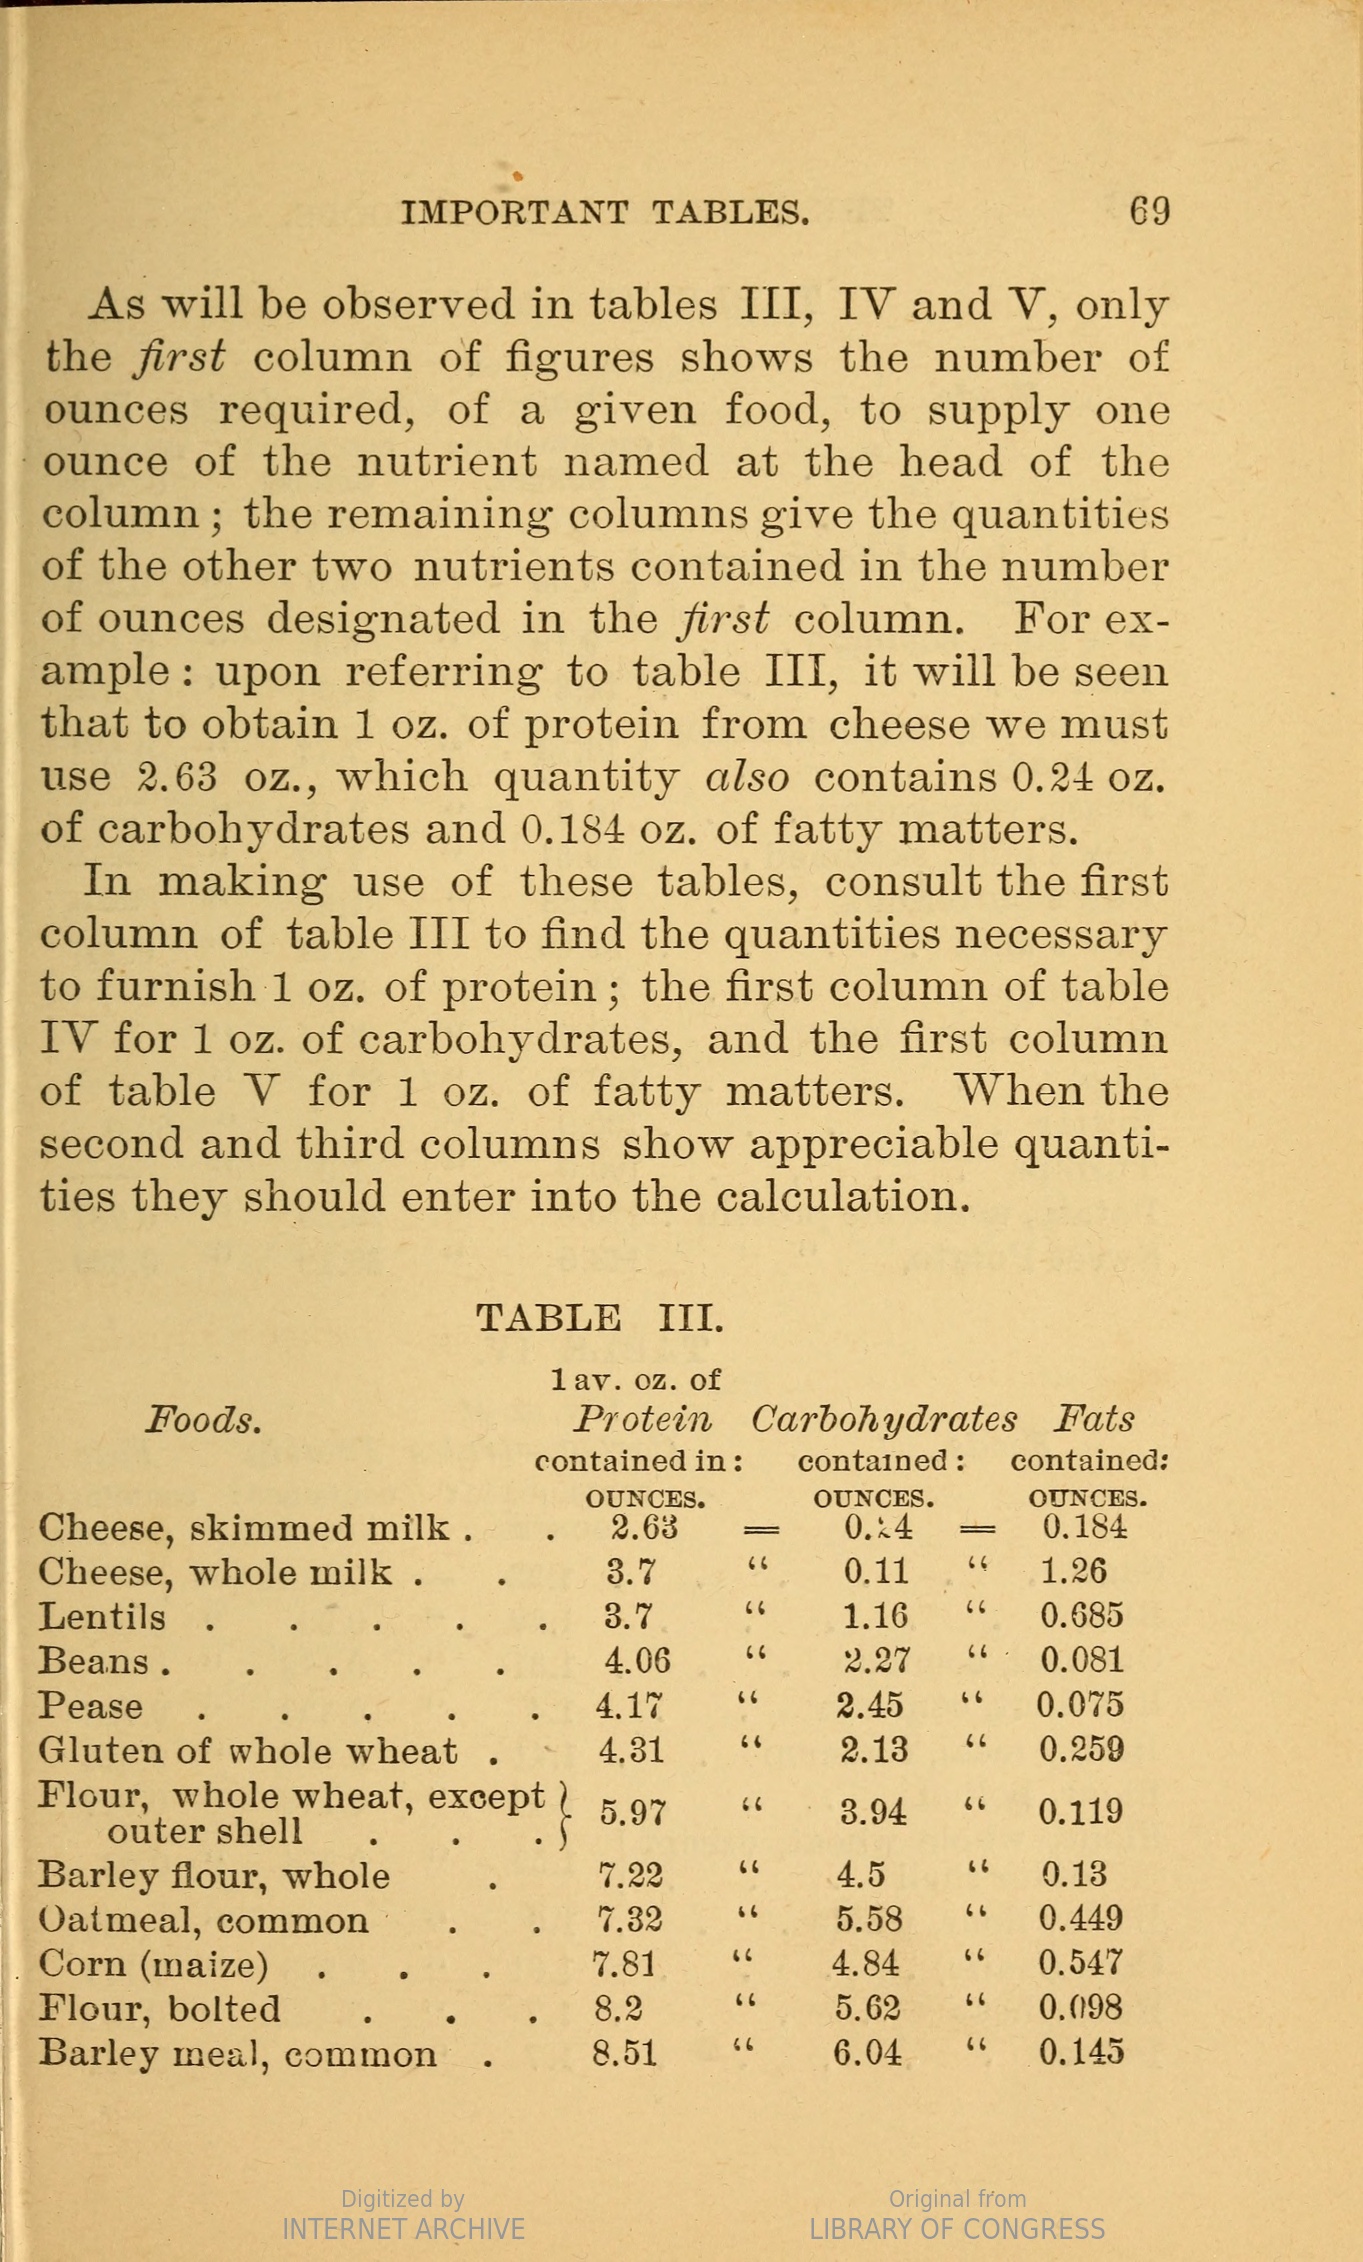 Page showing a table of carbohydrates, protein, and fats in various foodstuffs, such as cheese, lentils, and flour.